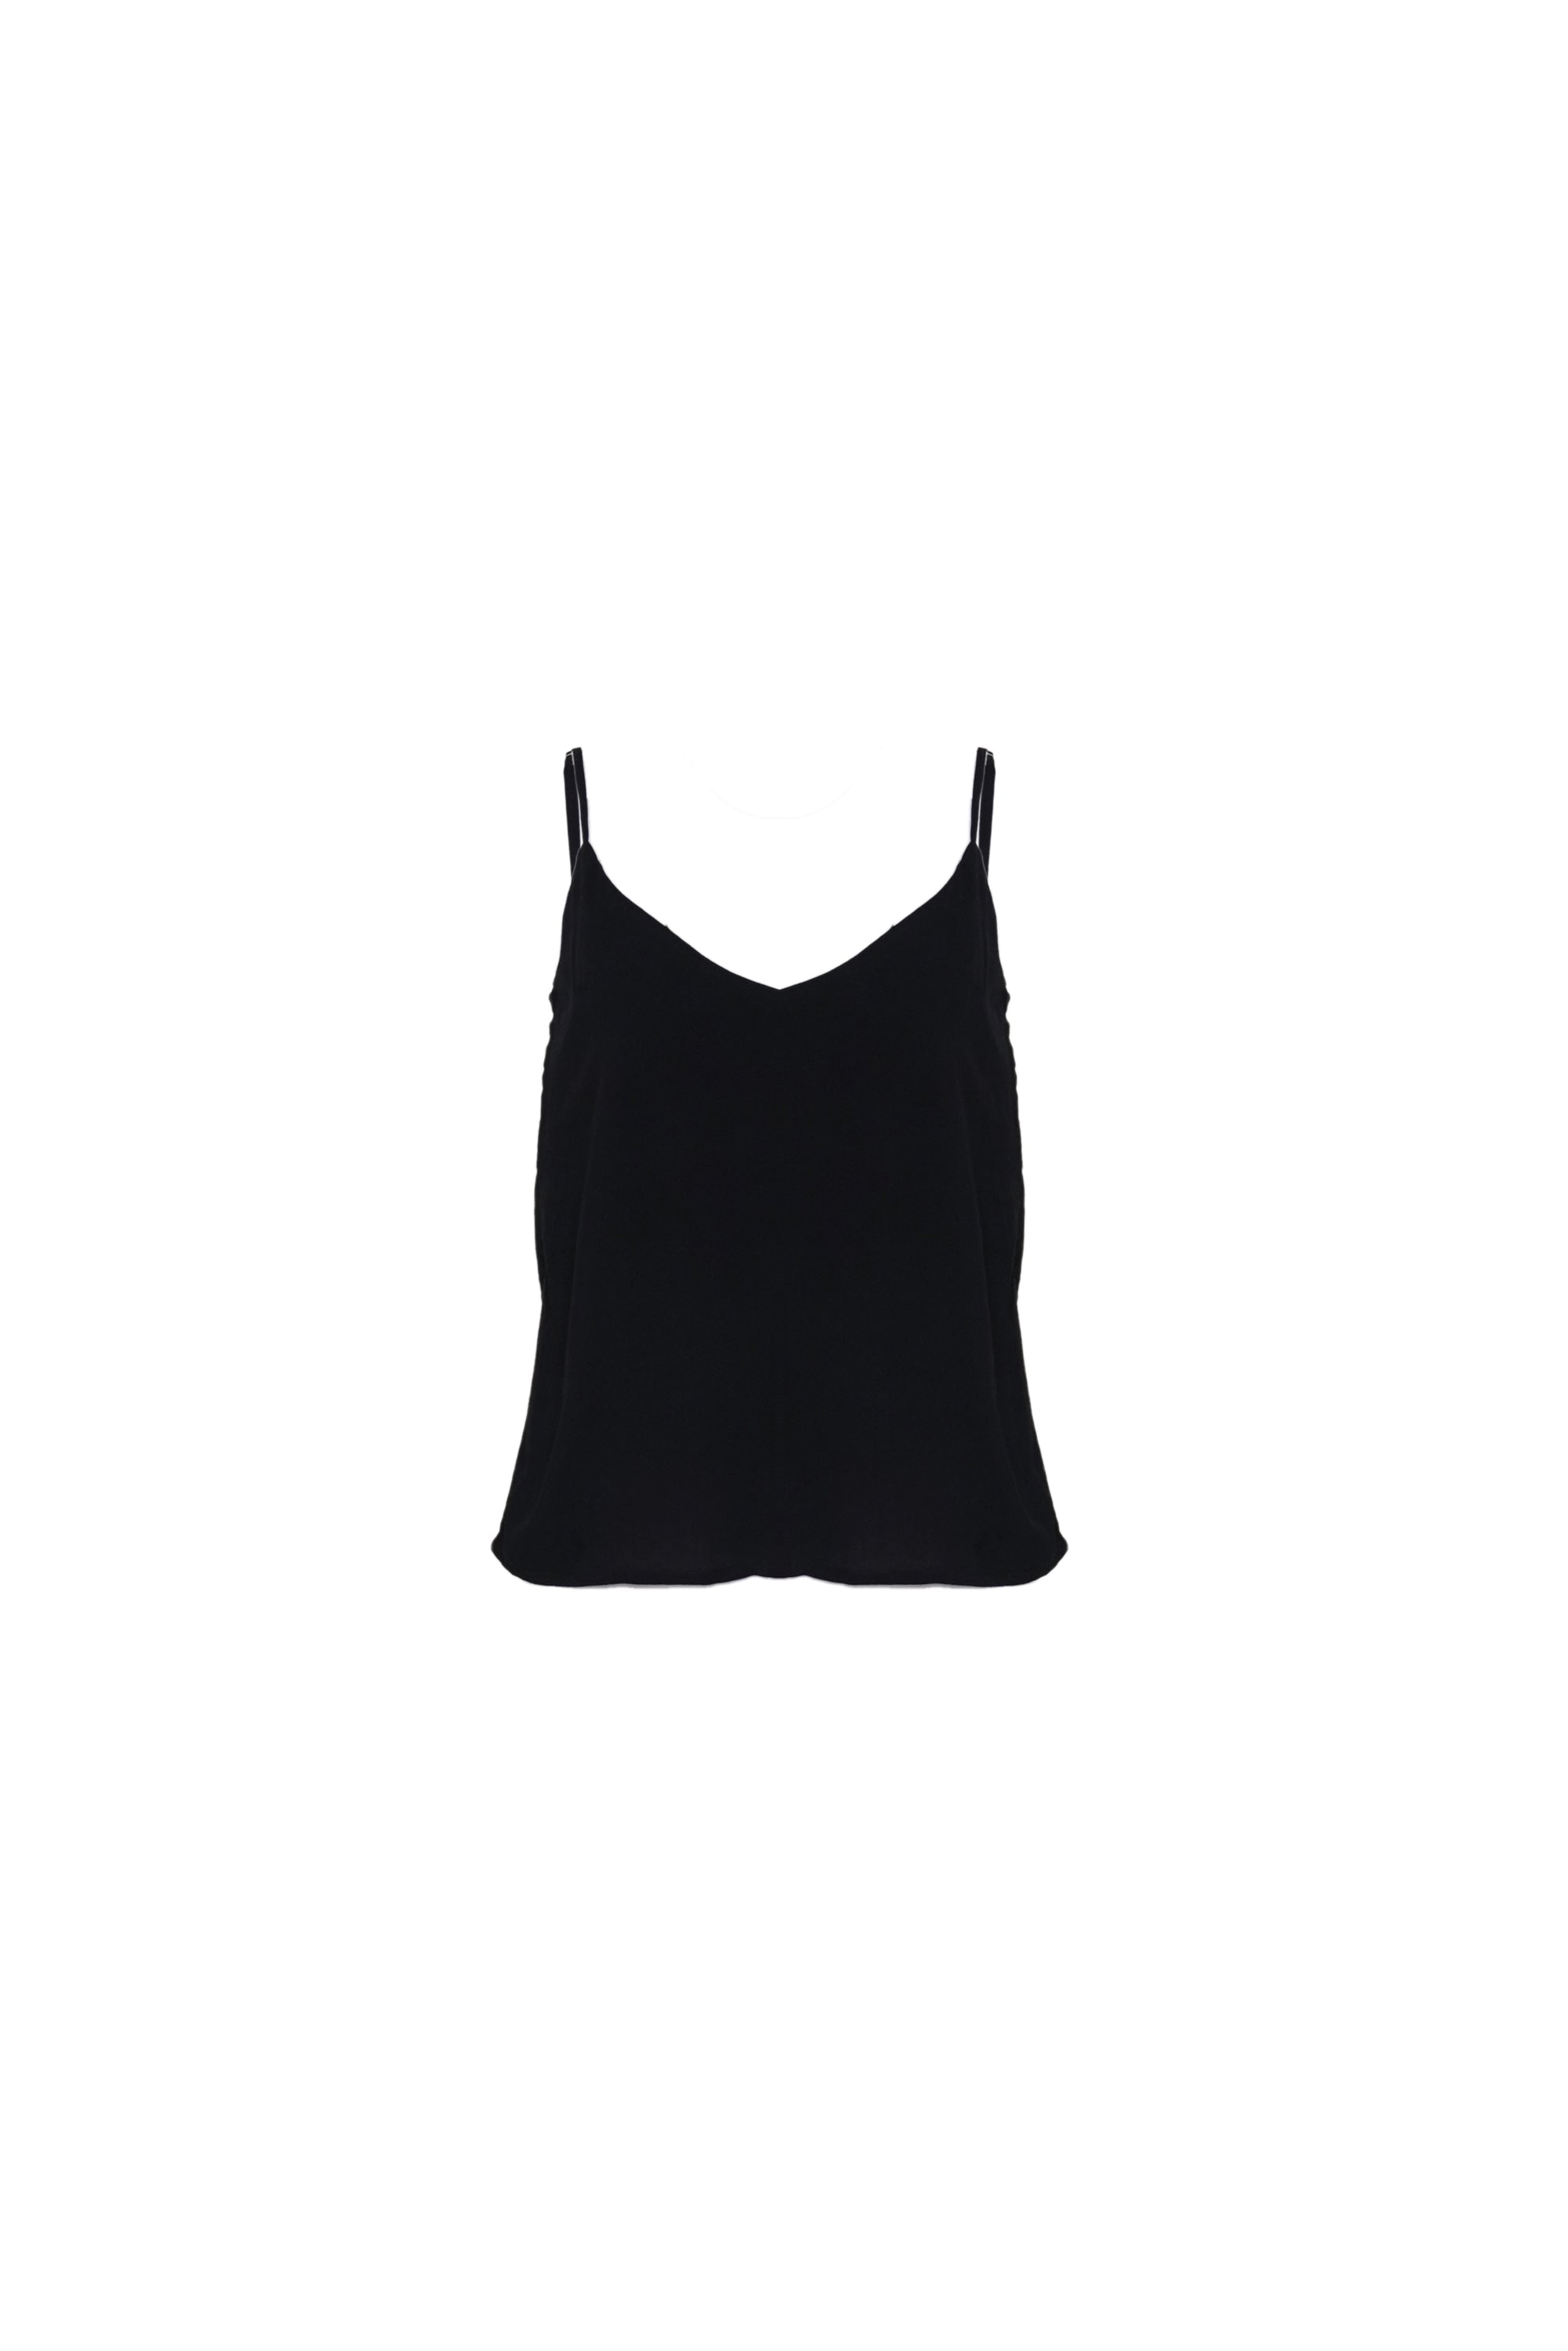 Front view of a black singlet top